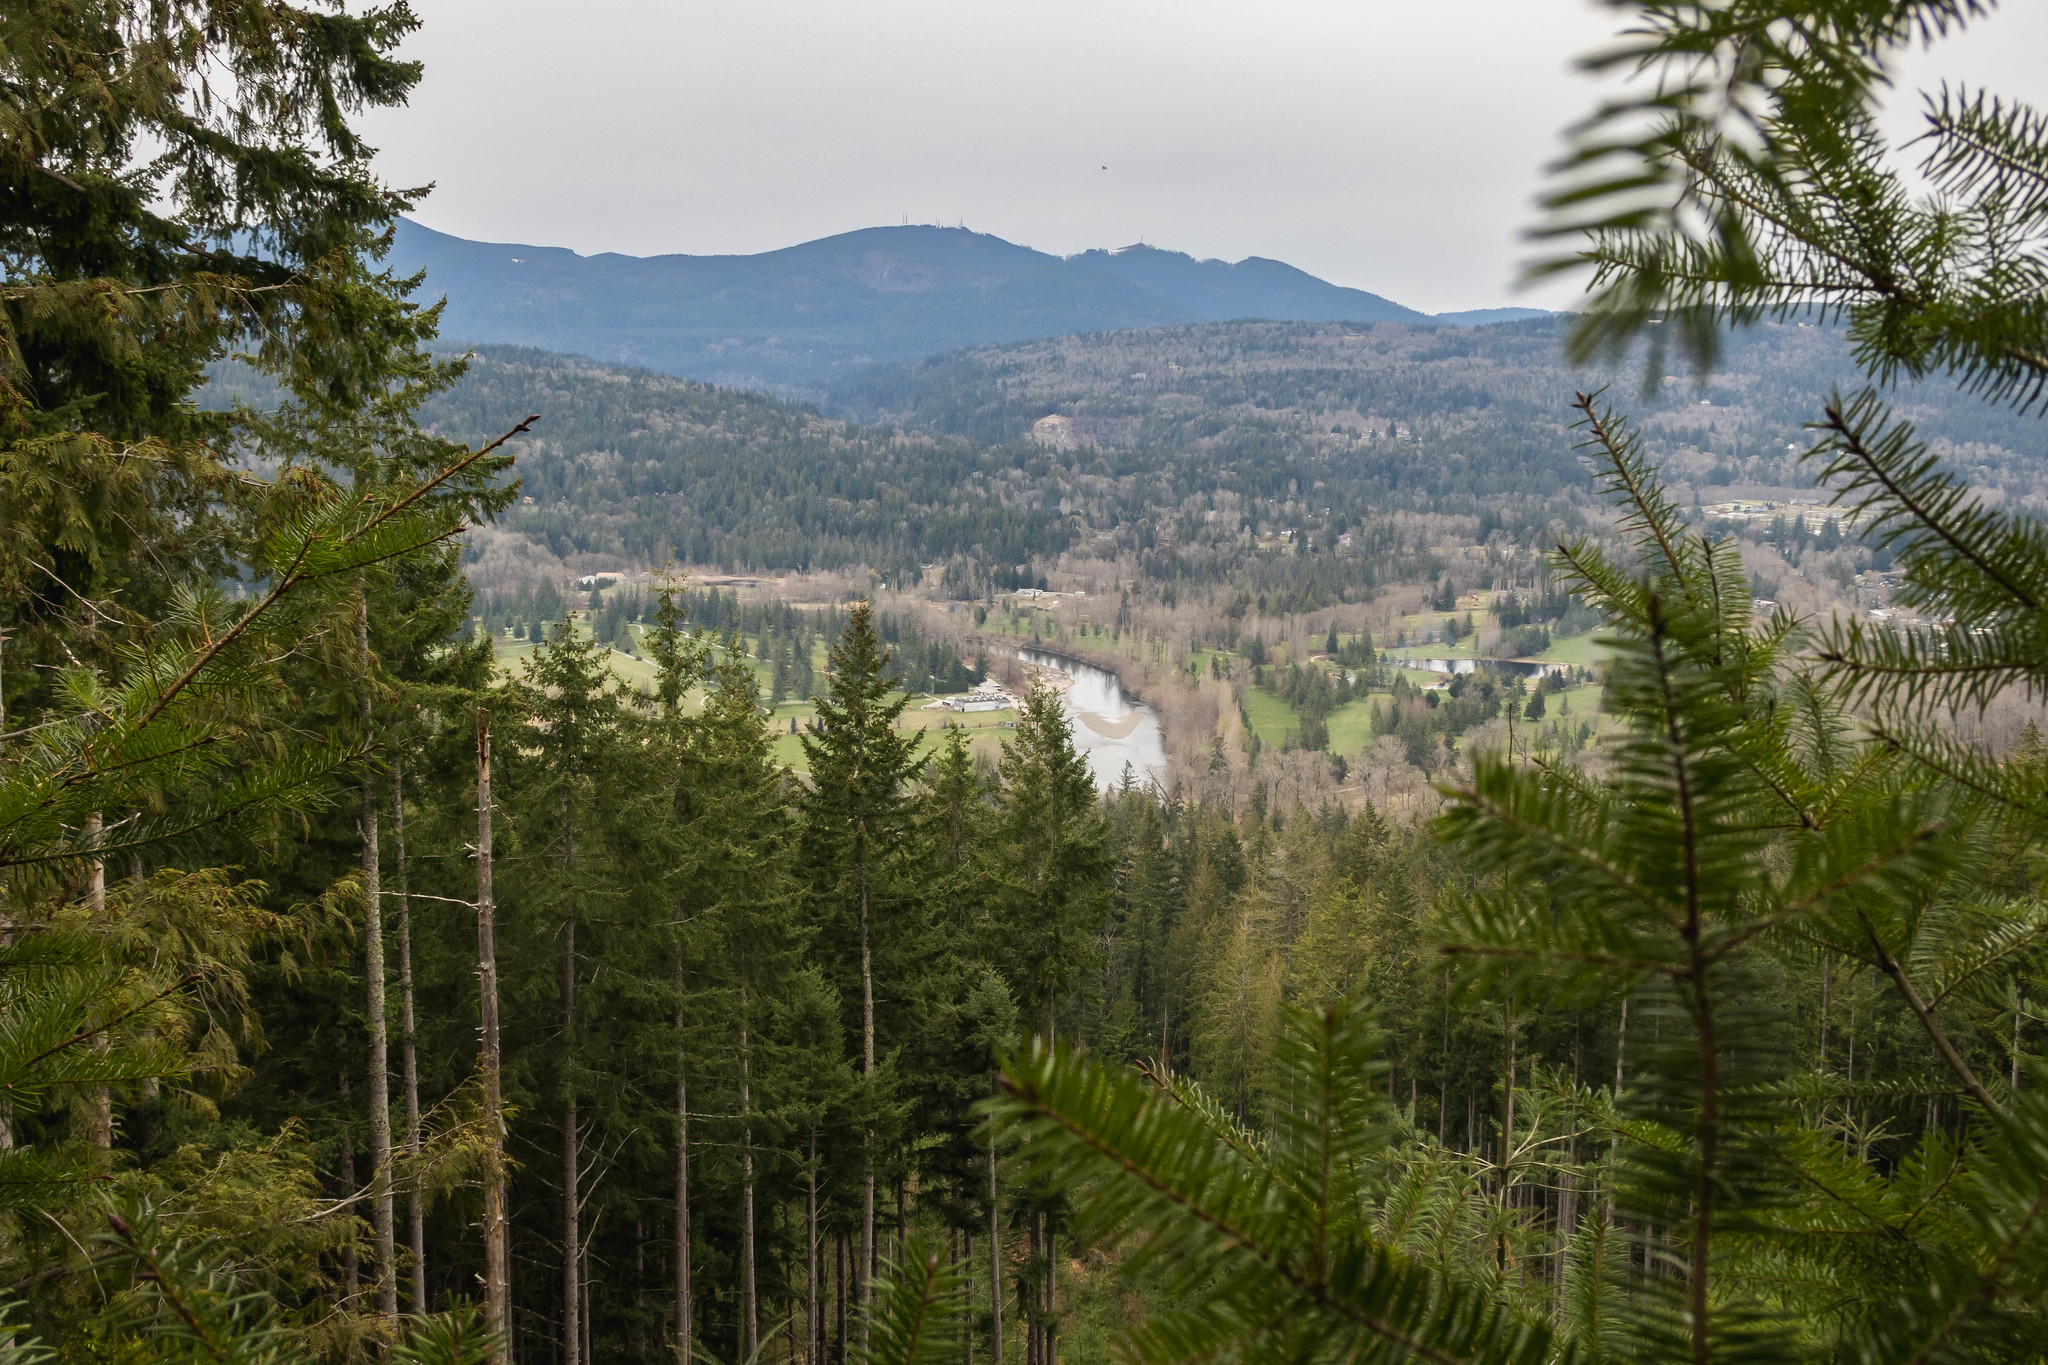 Hillside view of Snoqualmie River